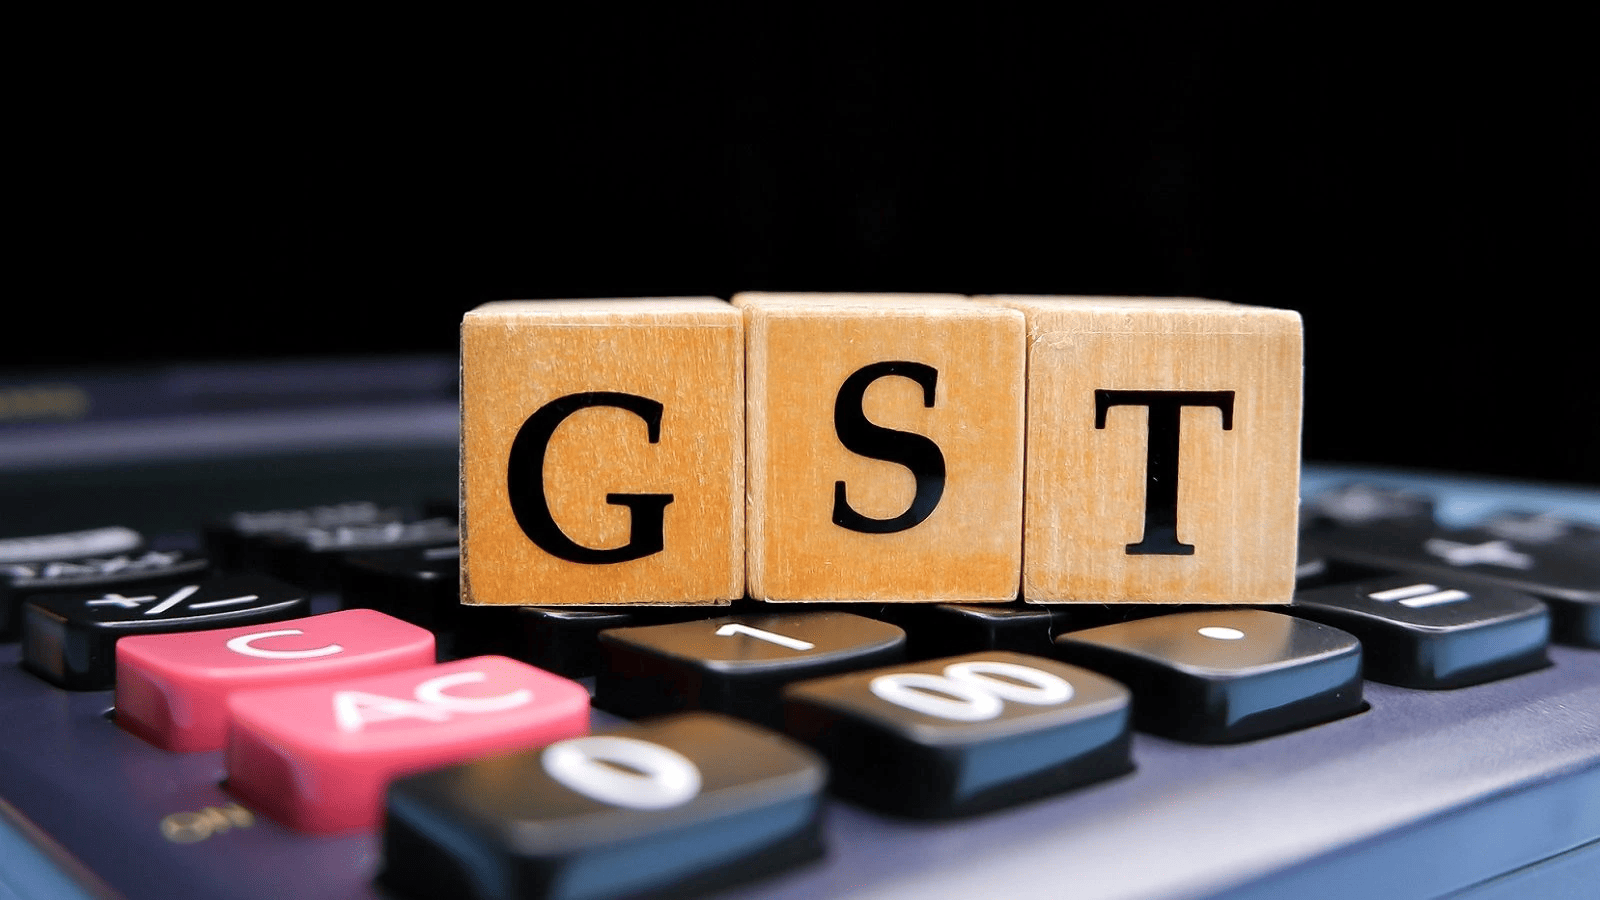 The Goods and Services Tax (GST)